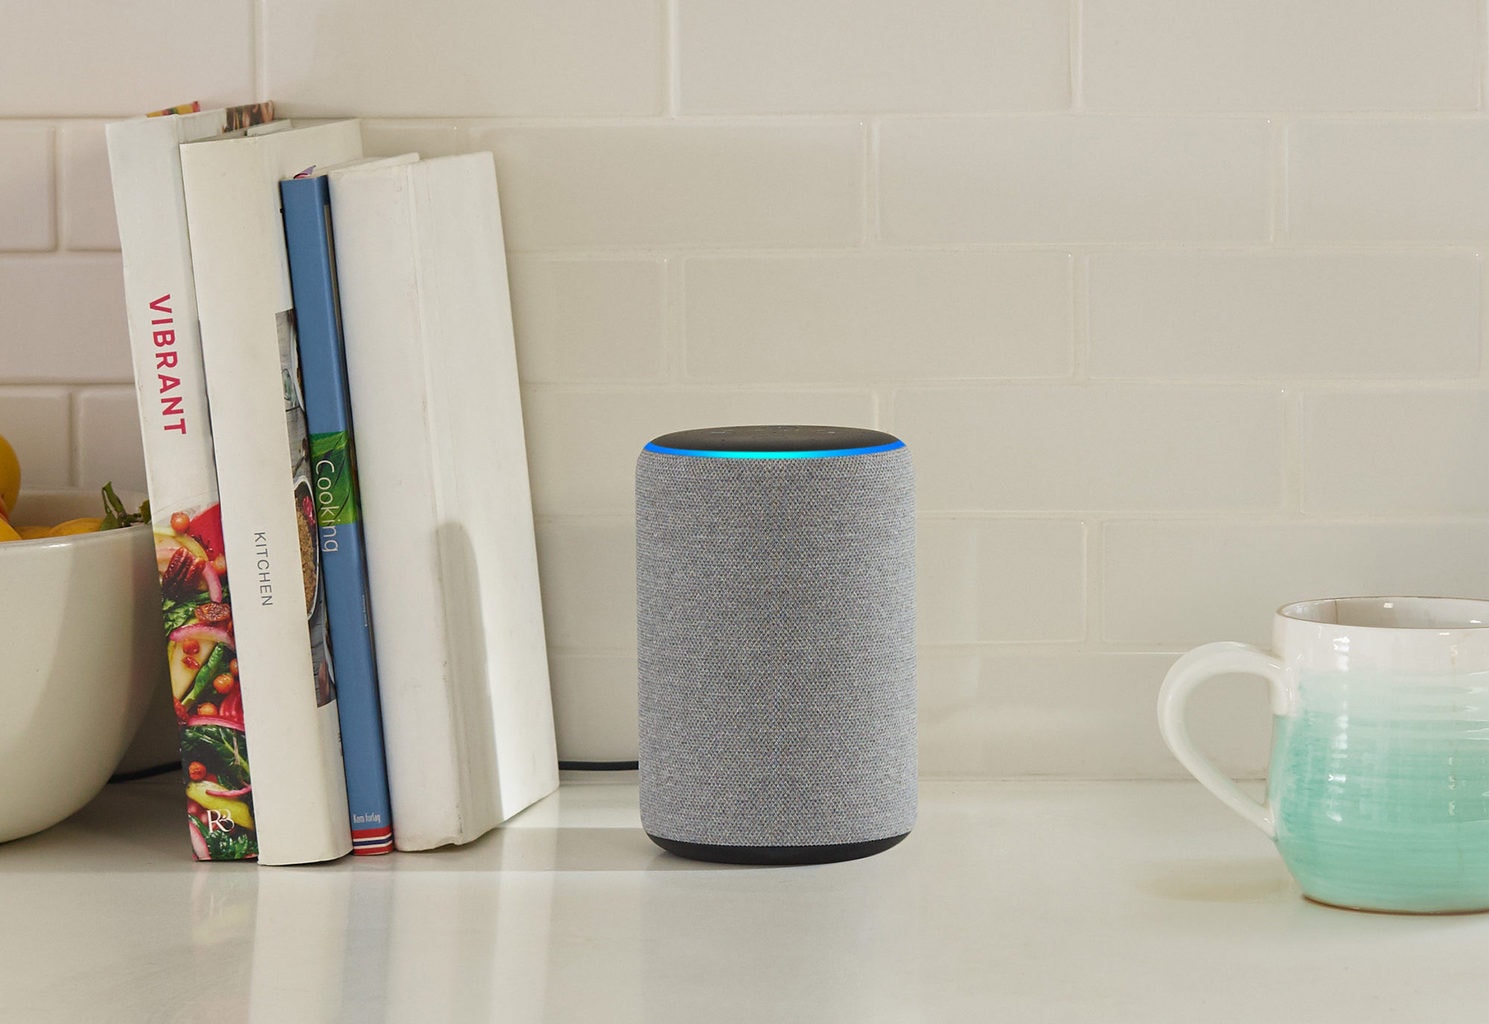 can you use an alexa as a bluetooth speaker